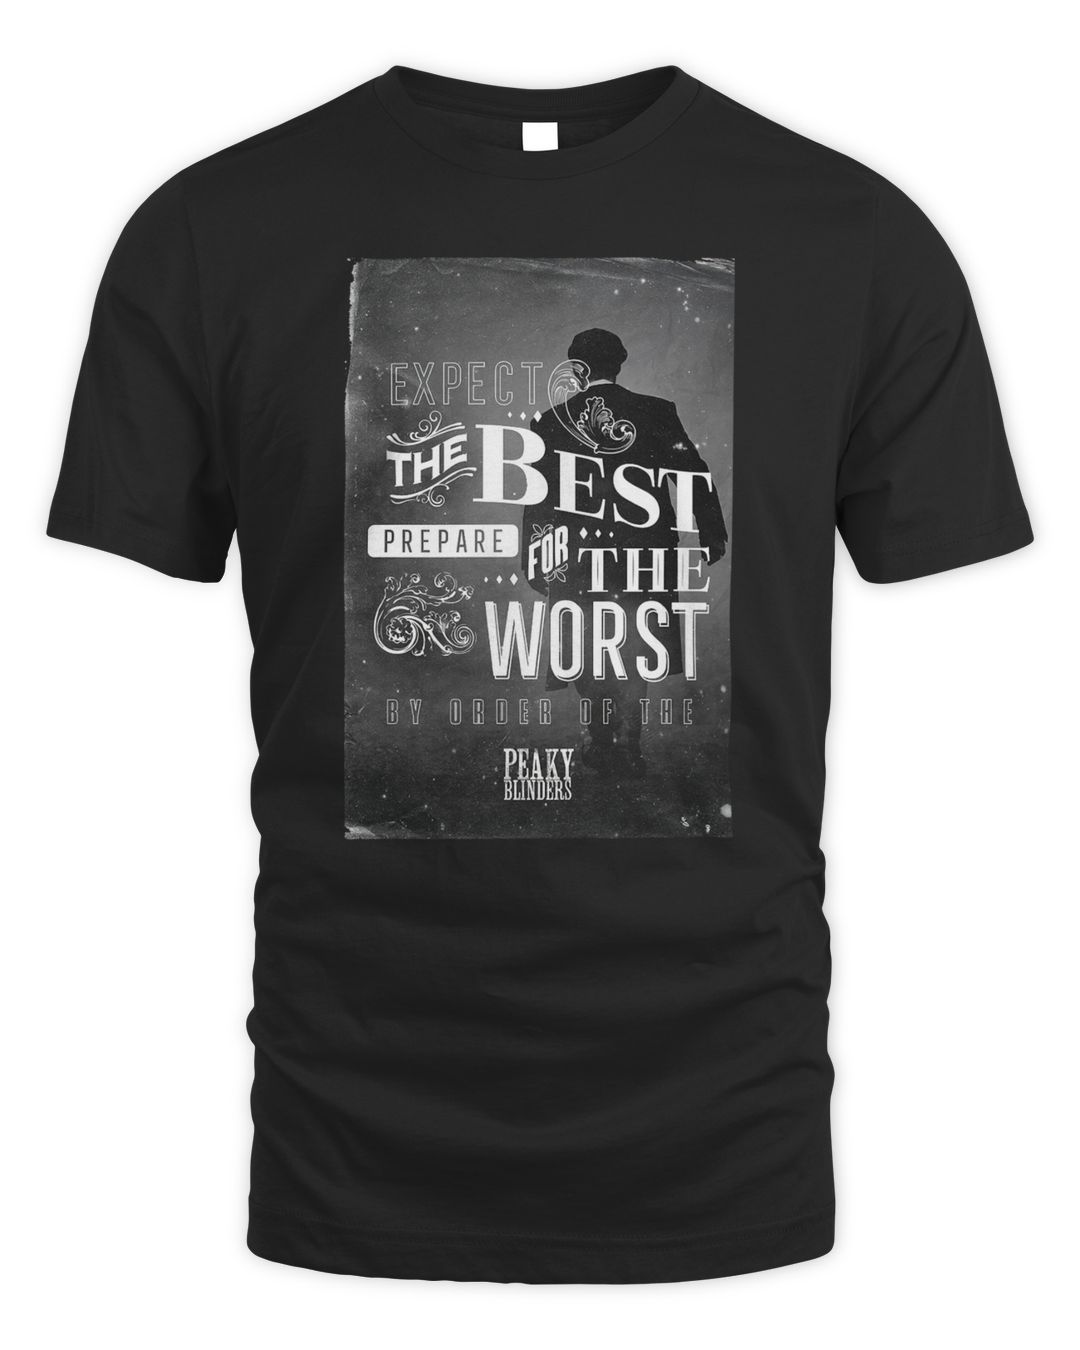 Peaky Blinders Merch Prepare For The Worst Shirt